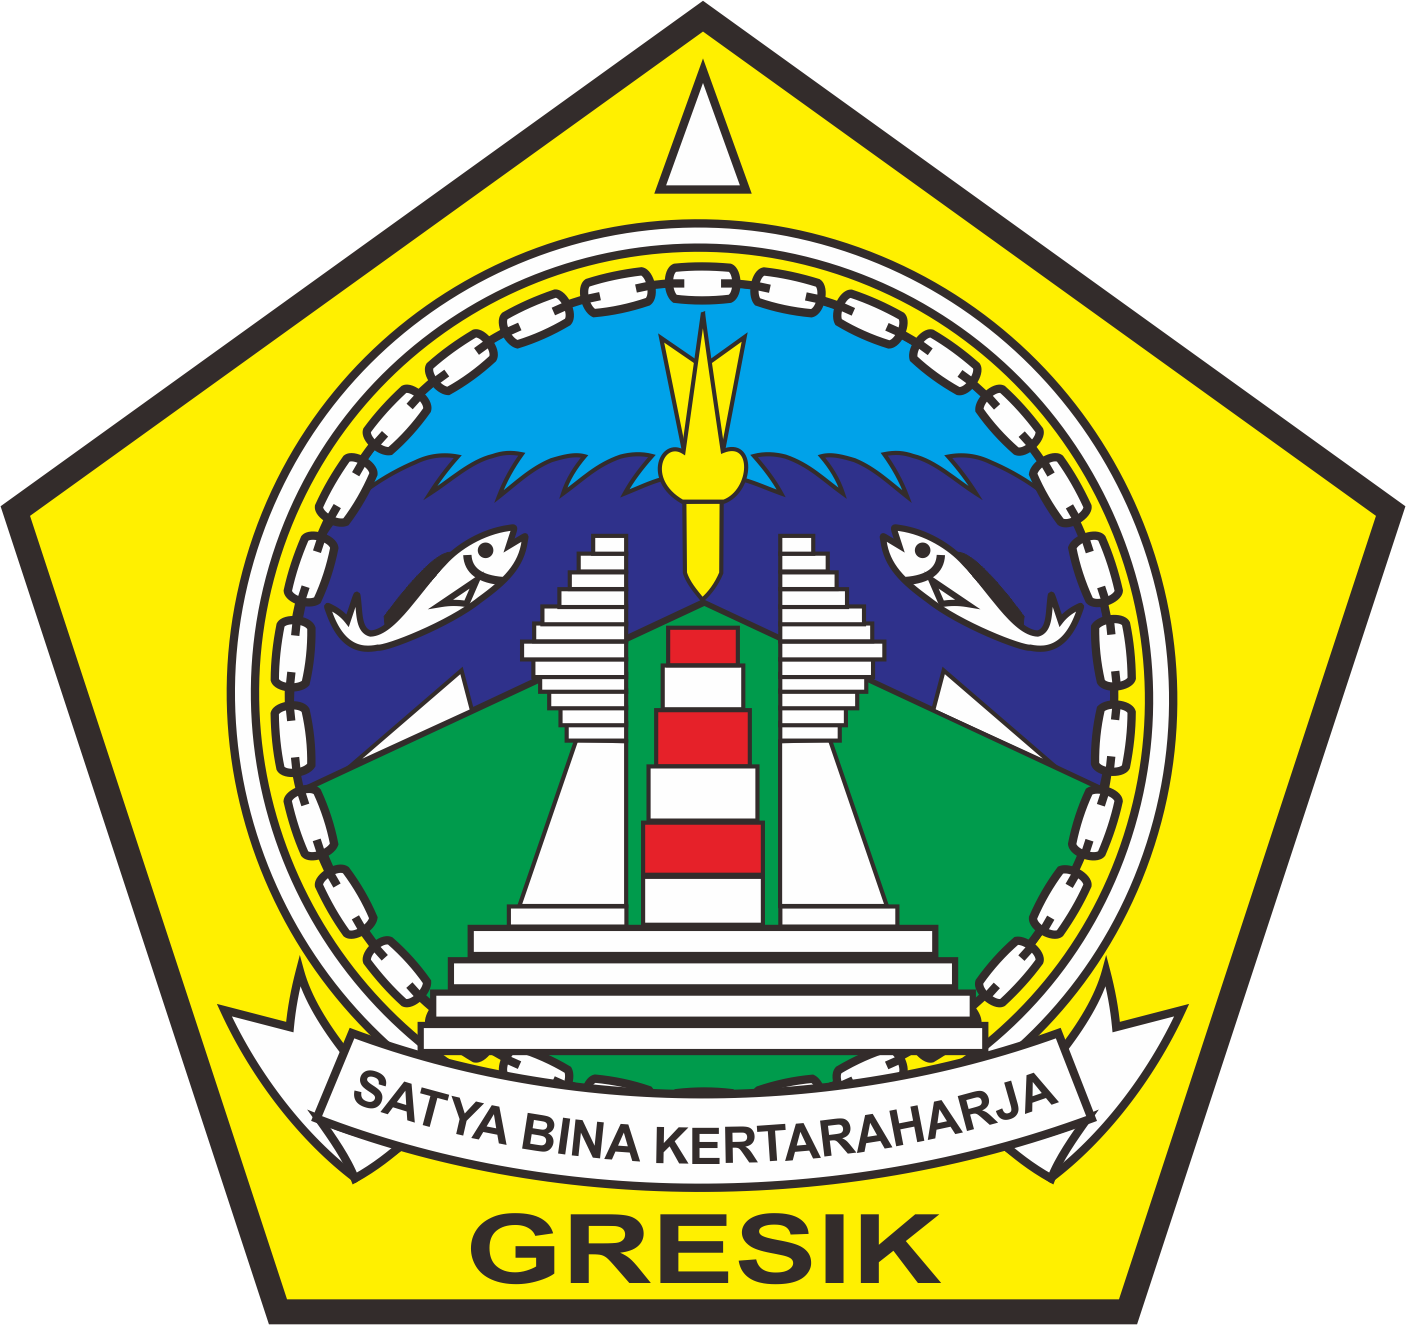 Everything is Possible: #Gresik526